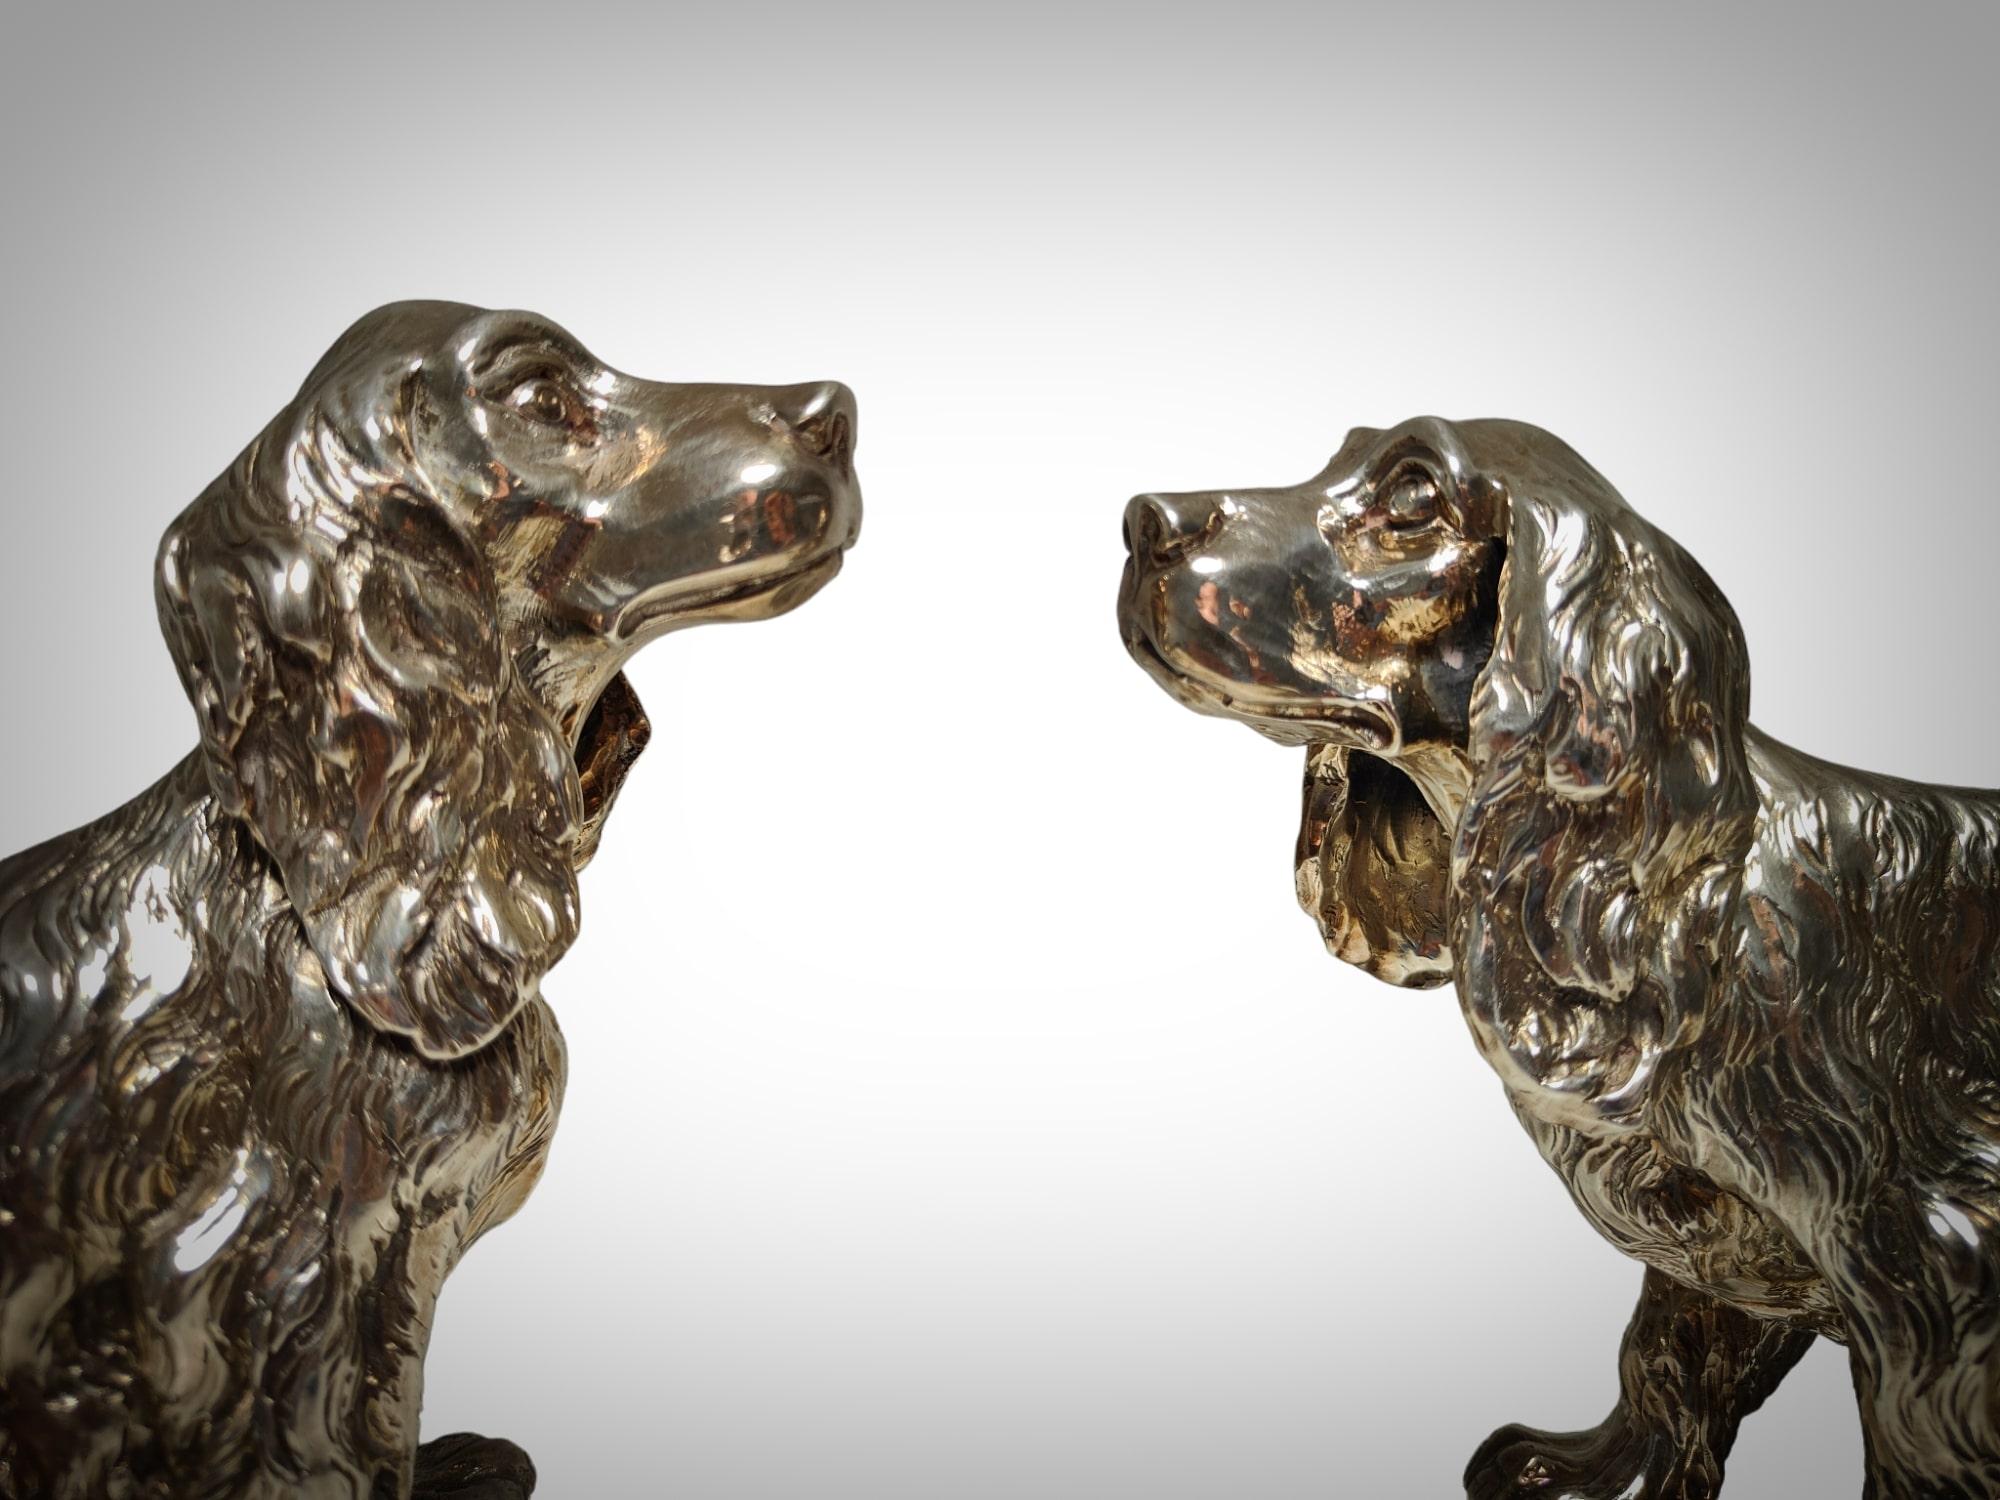 This elegant pair of Cocker Spaniel dogs is a true gem of solid silver craftsmanship. Each of these charming canines has been meticulously carved from authentic 925 sterling silver, showcasing the expertise of 20th-century Italian design. The level